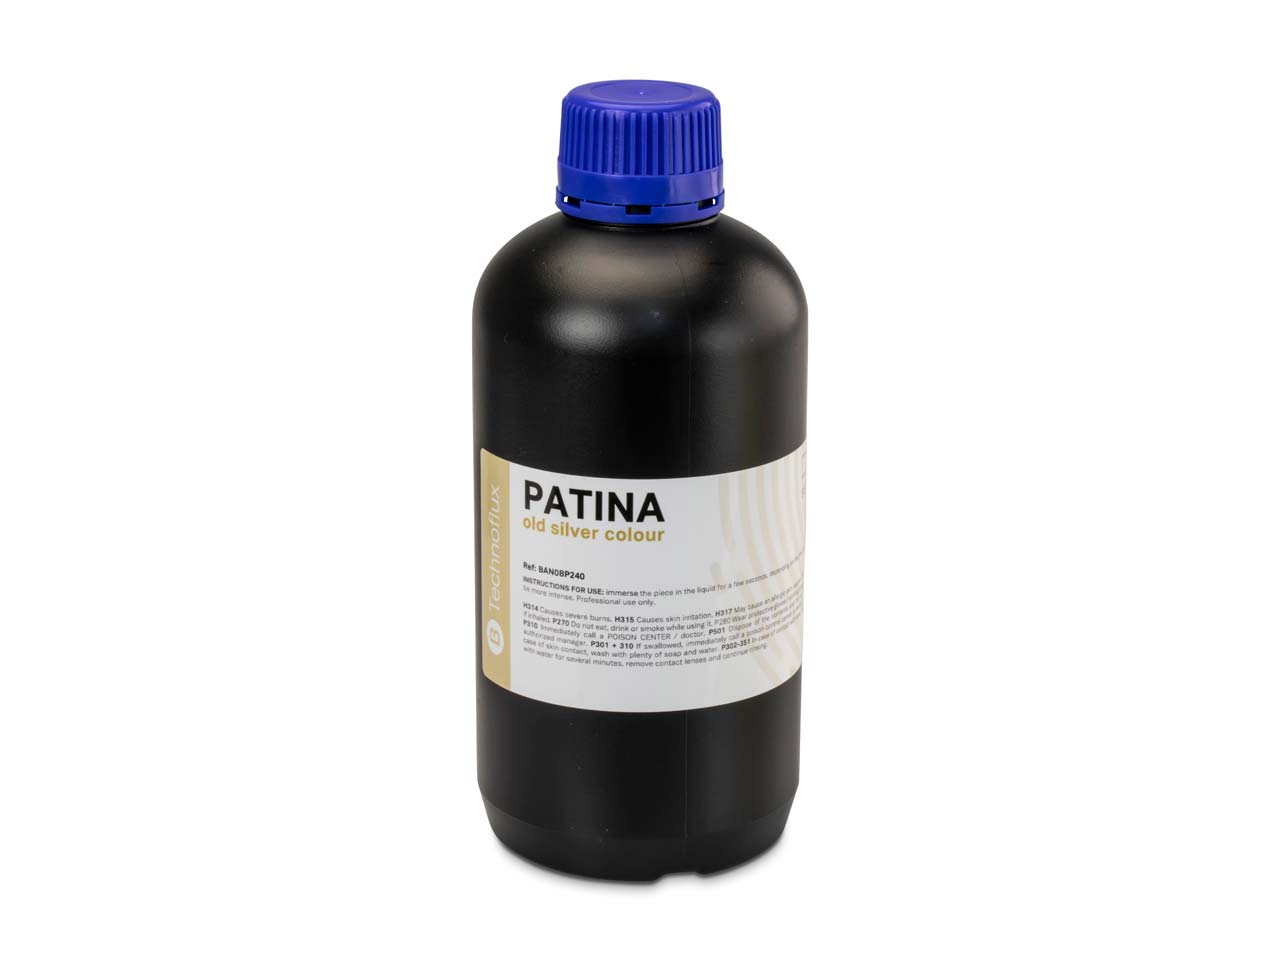 Do you have instructions for Patina Oxidising Solution 1 Litre UN2922?